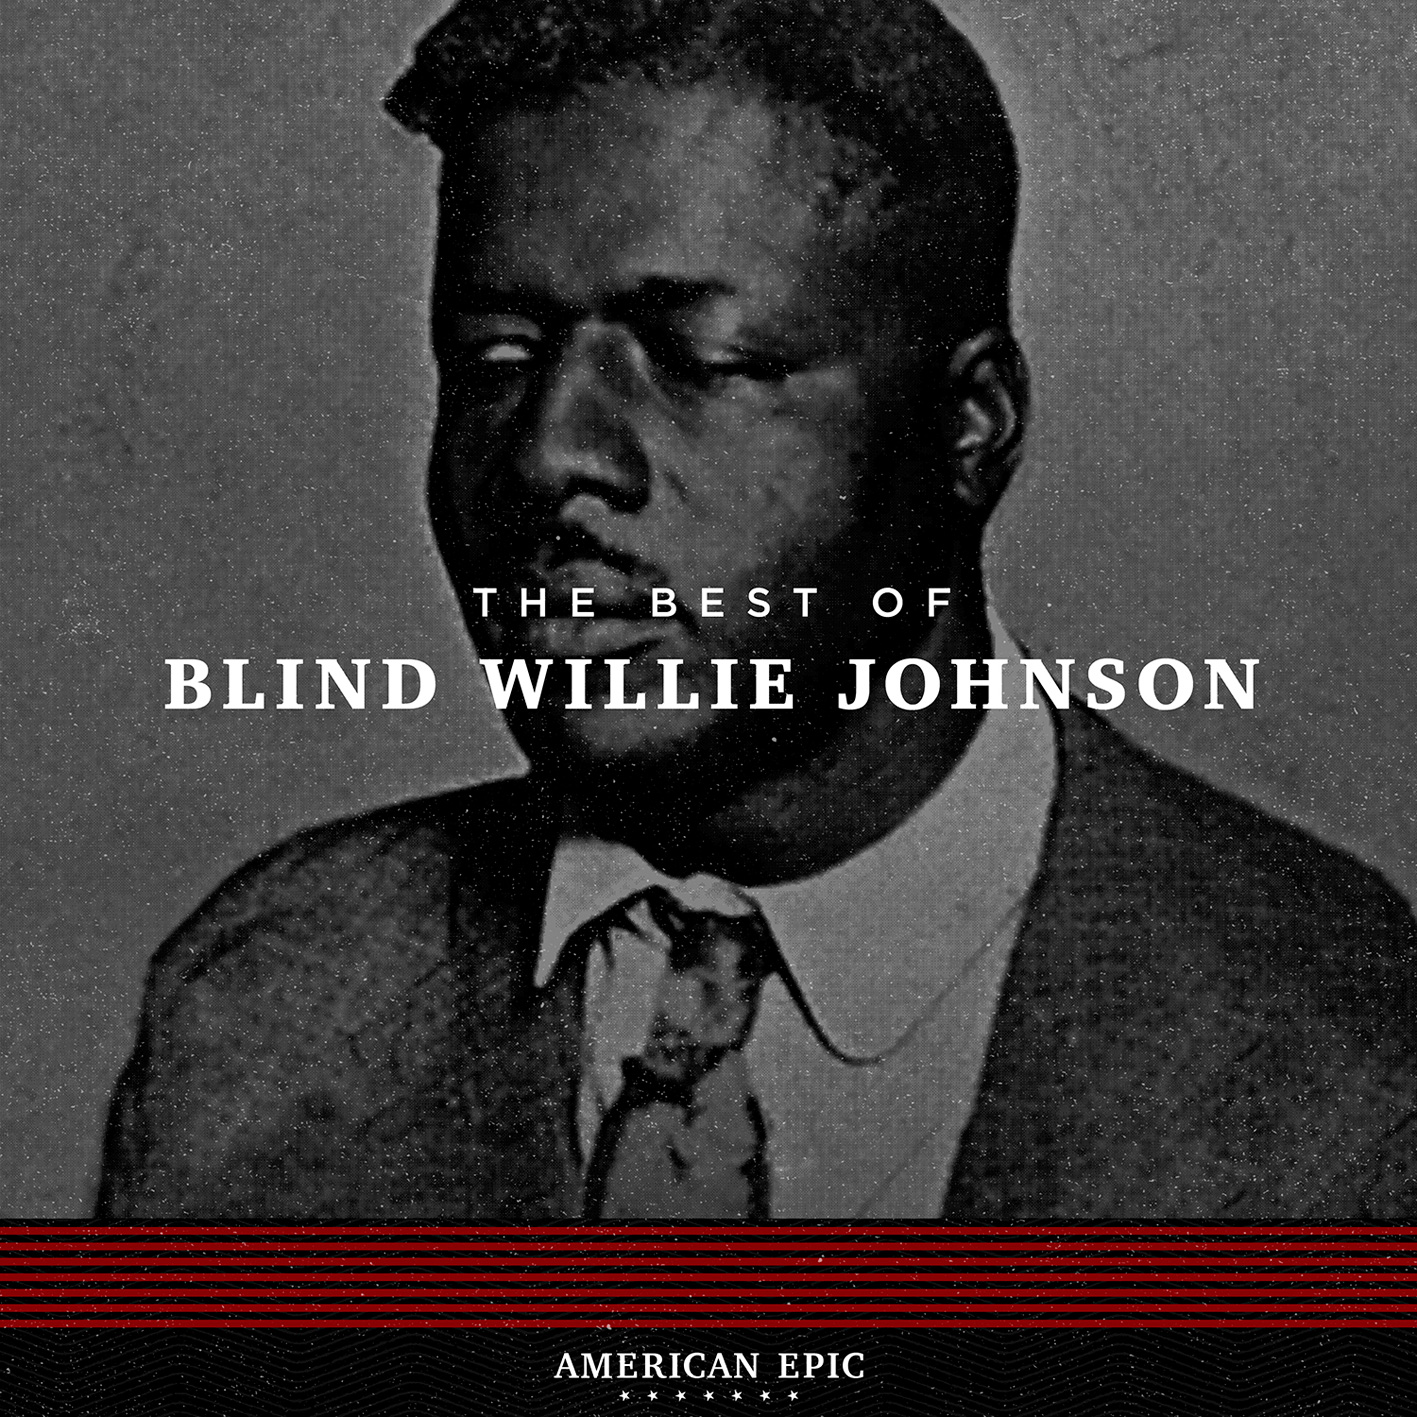 Blind Willie Johnson – American Epic: The Best Of Blind Willie Johnson (2017) [HDTracks FLAC 24bit/96kHz]